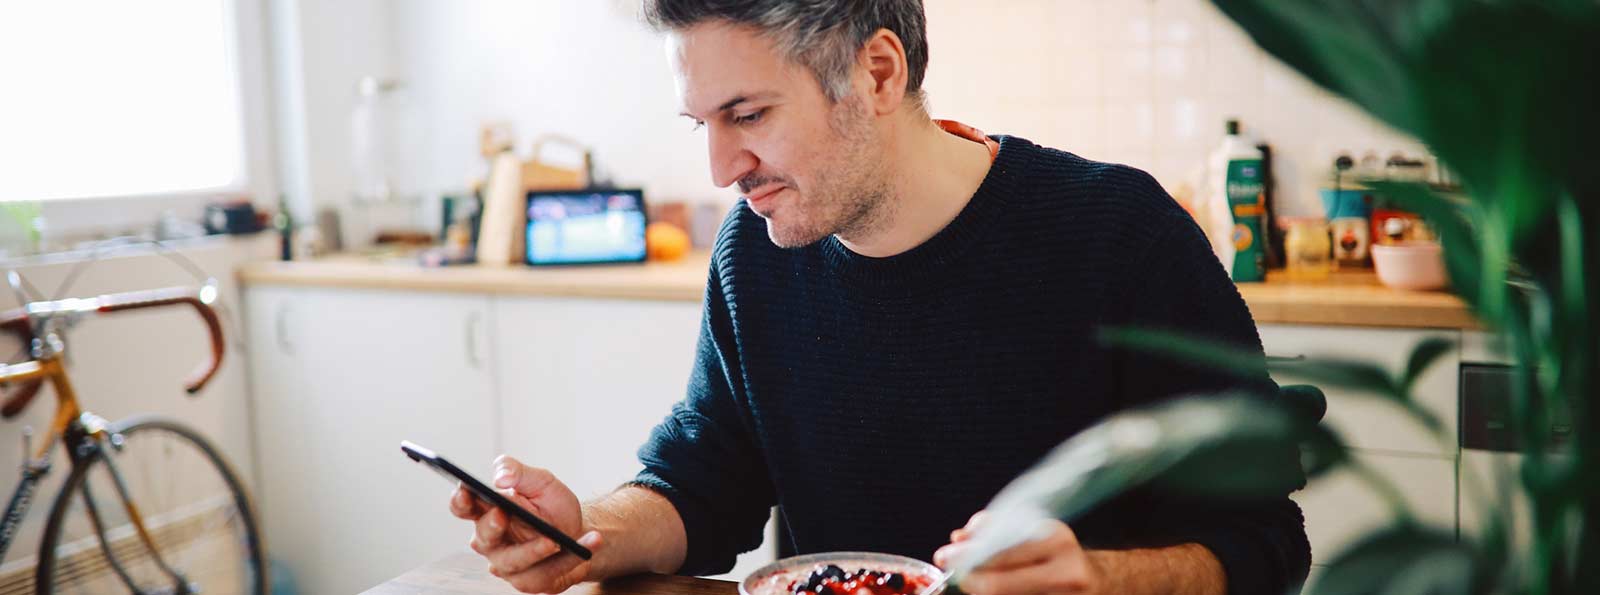 Man looking at phone while eating breakfast at home.